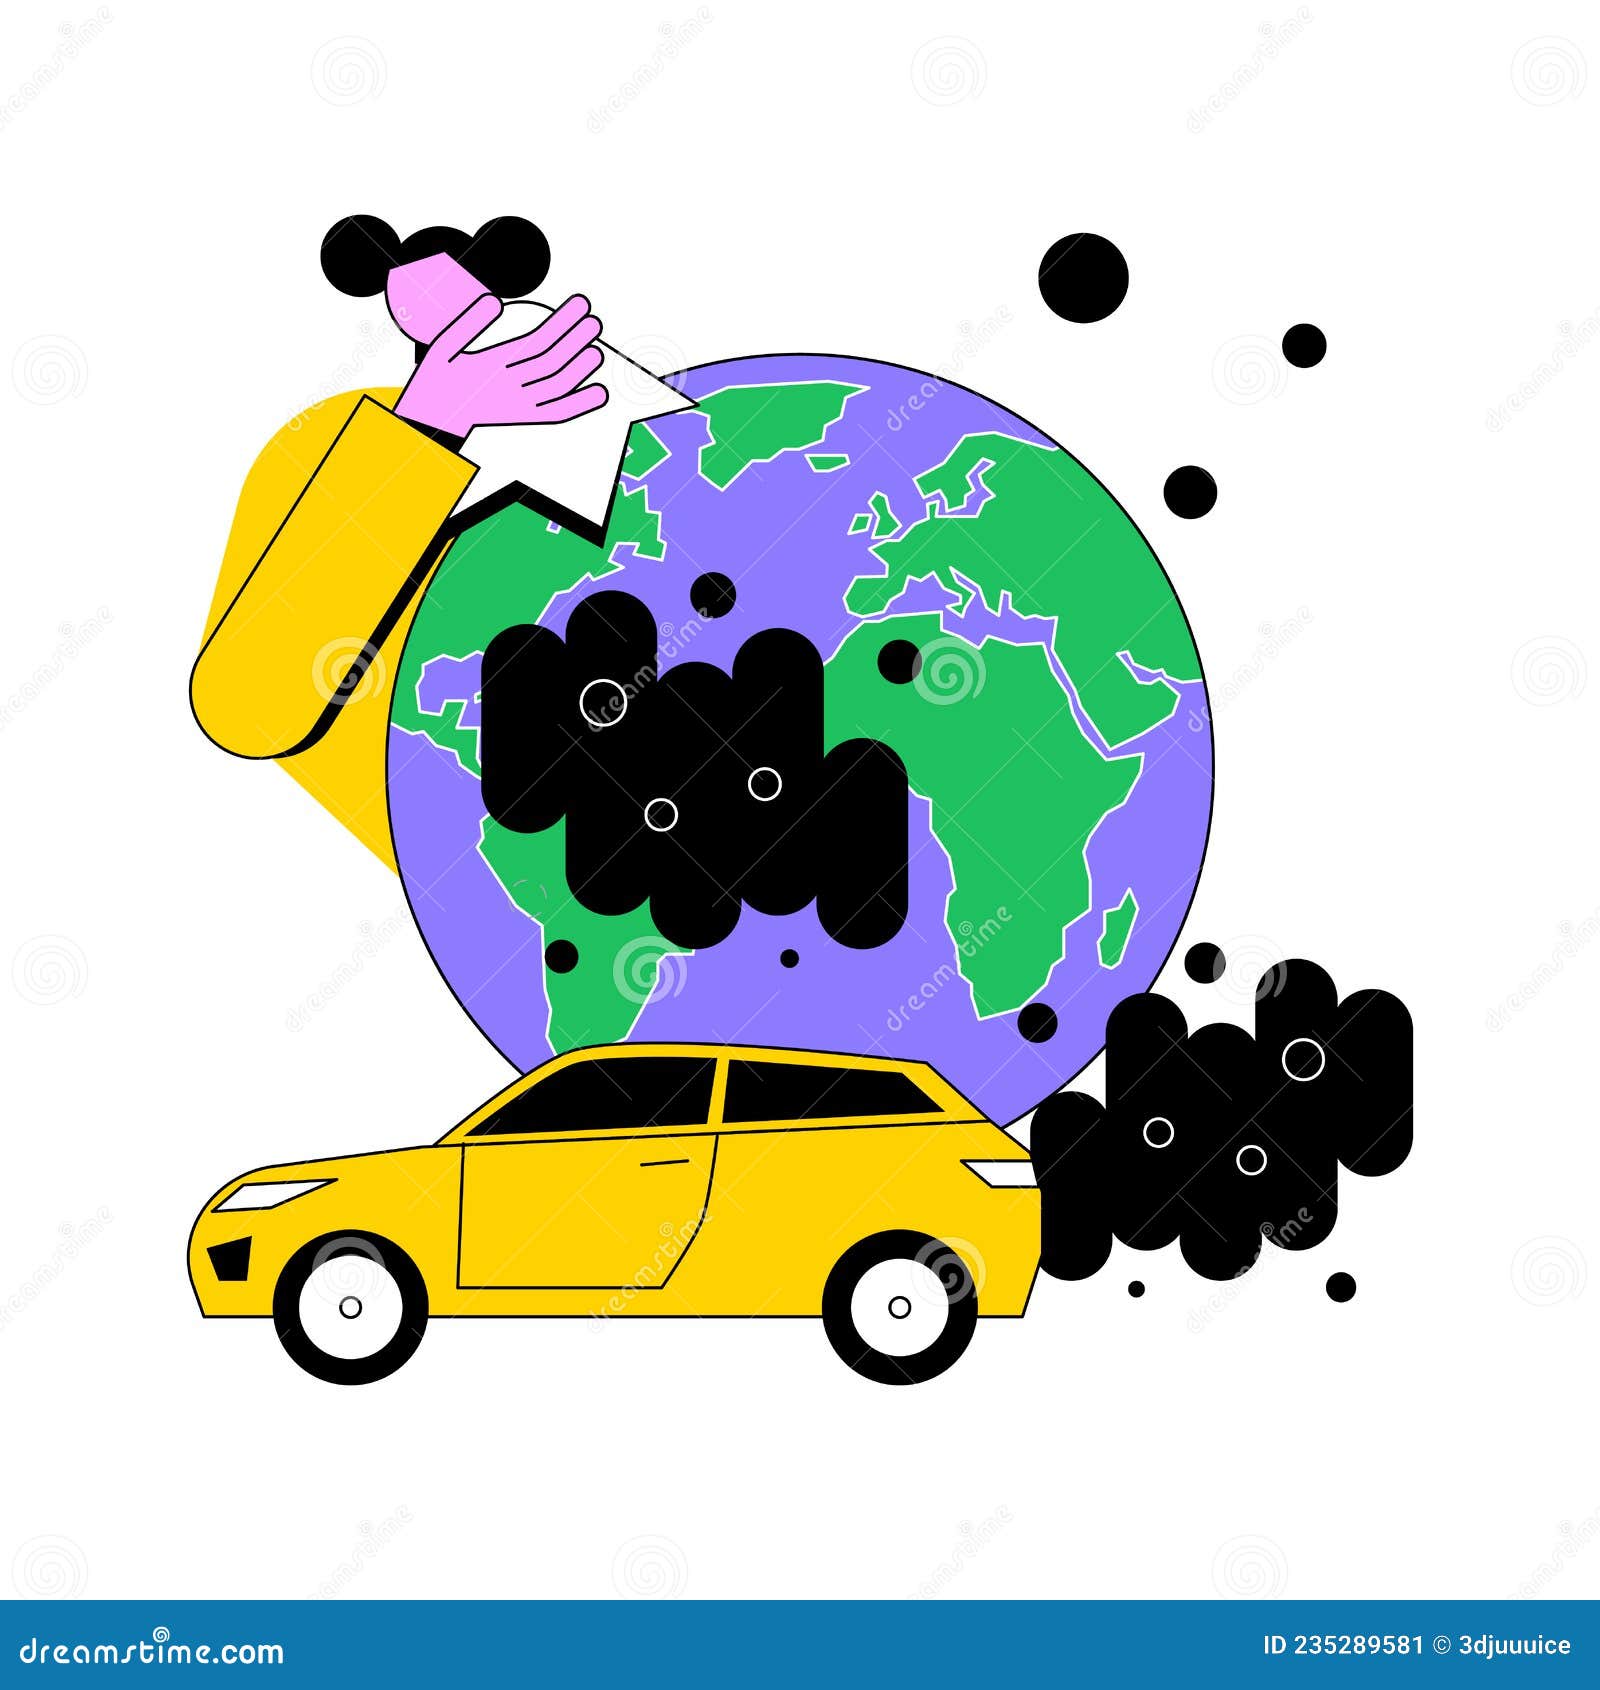 Motor Vehicle Pollution Abstract Concept Vector Illustration. Stock ...